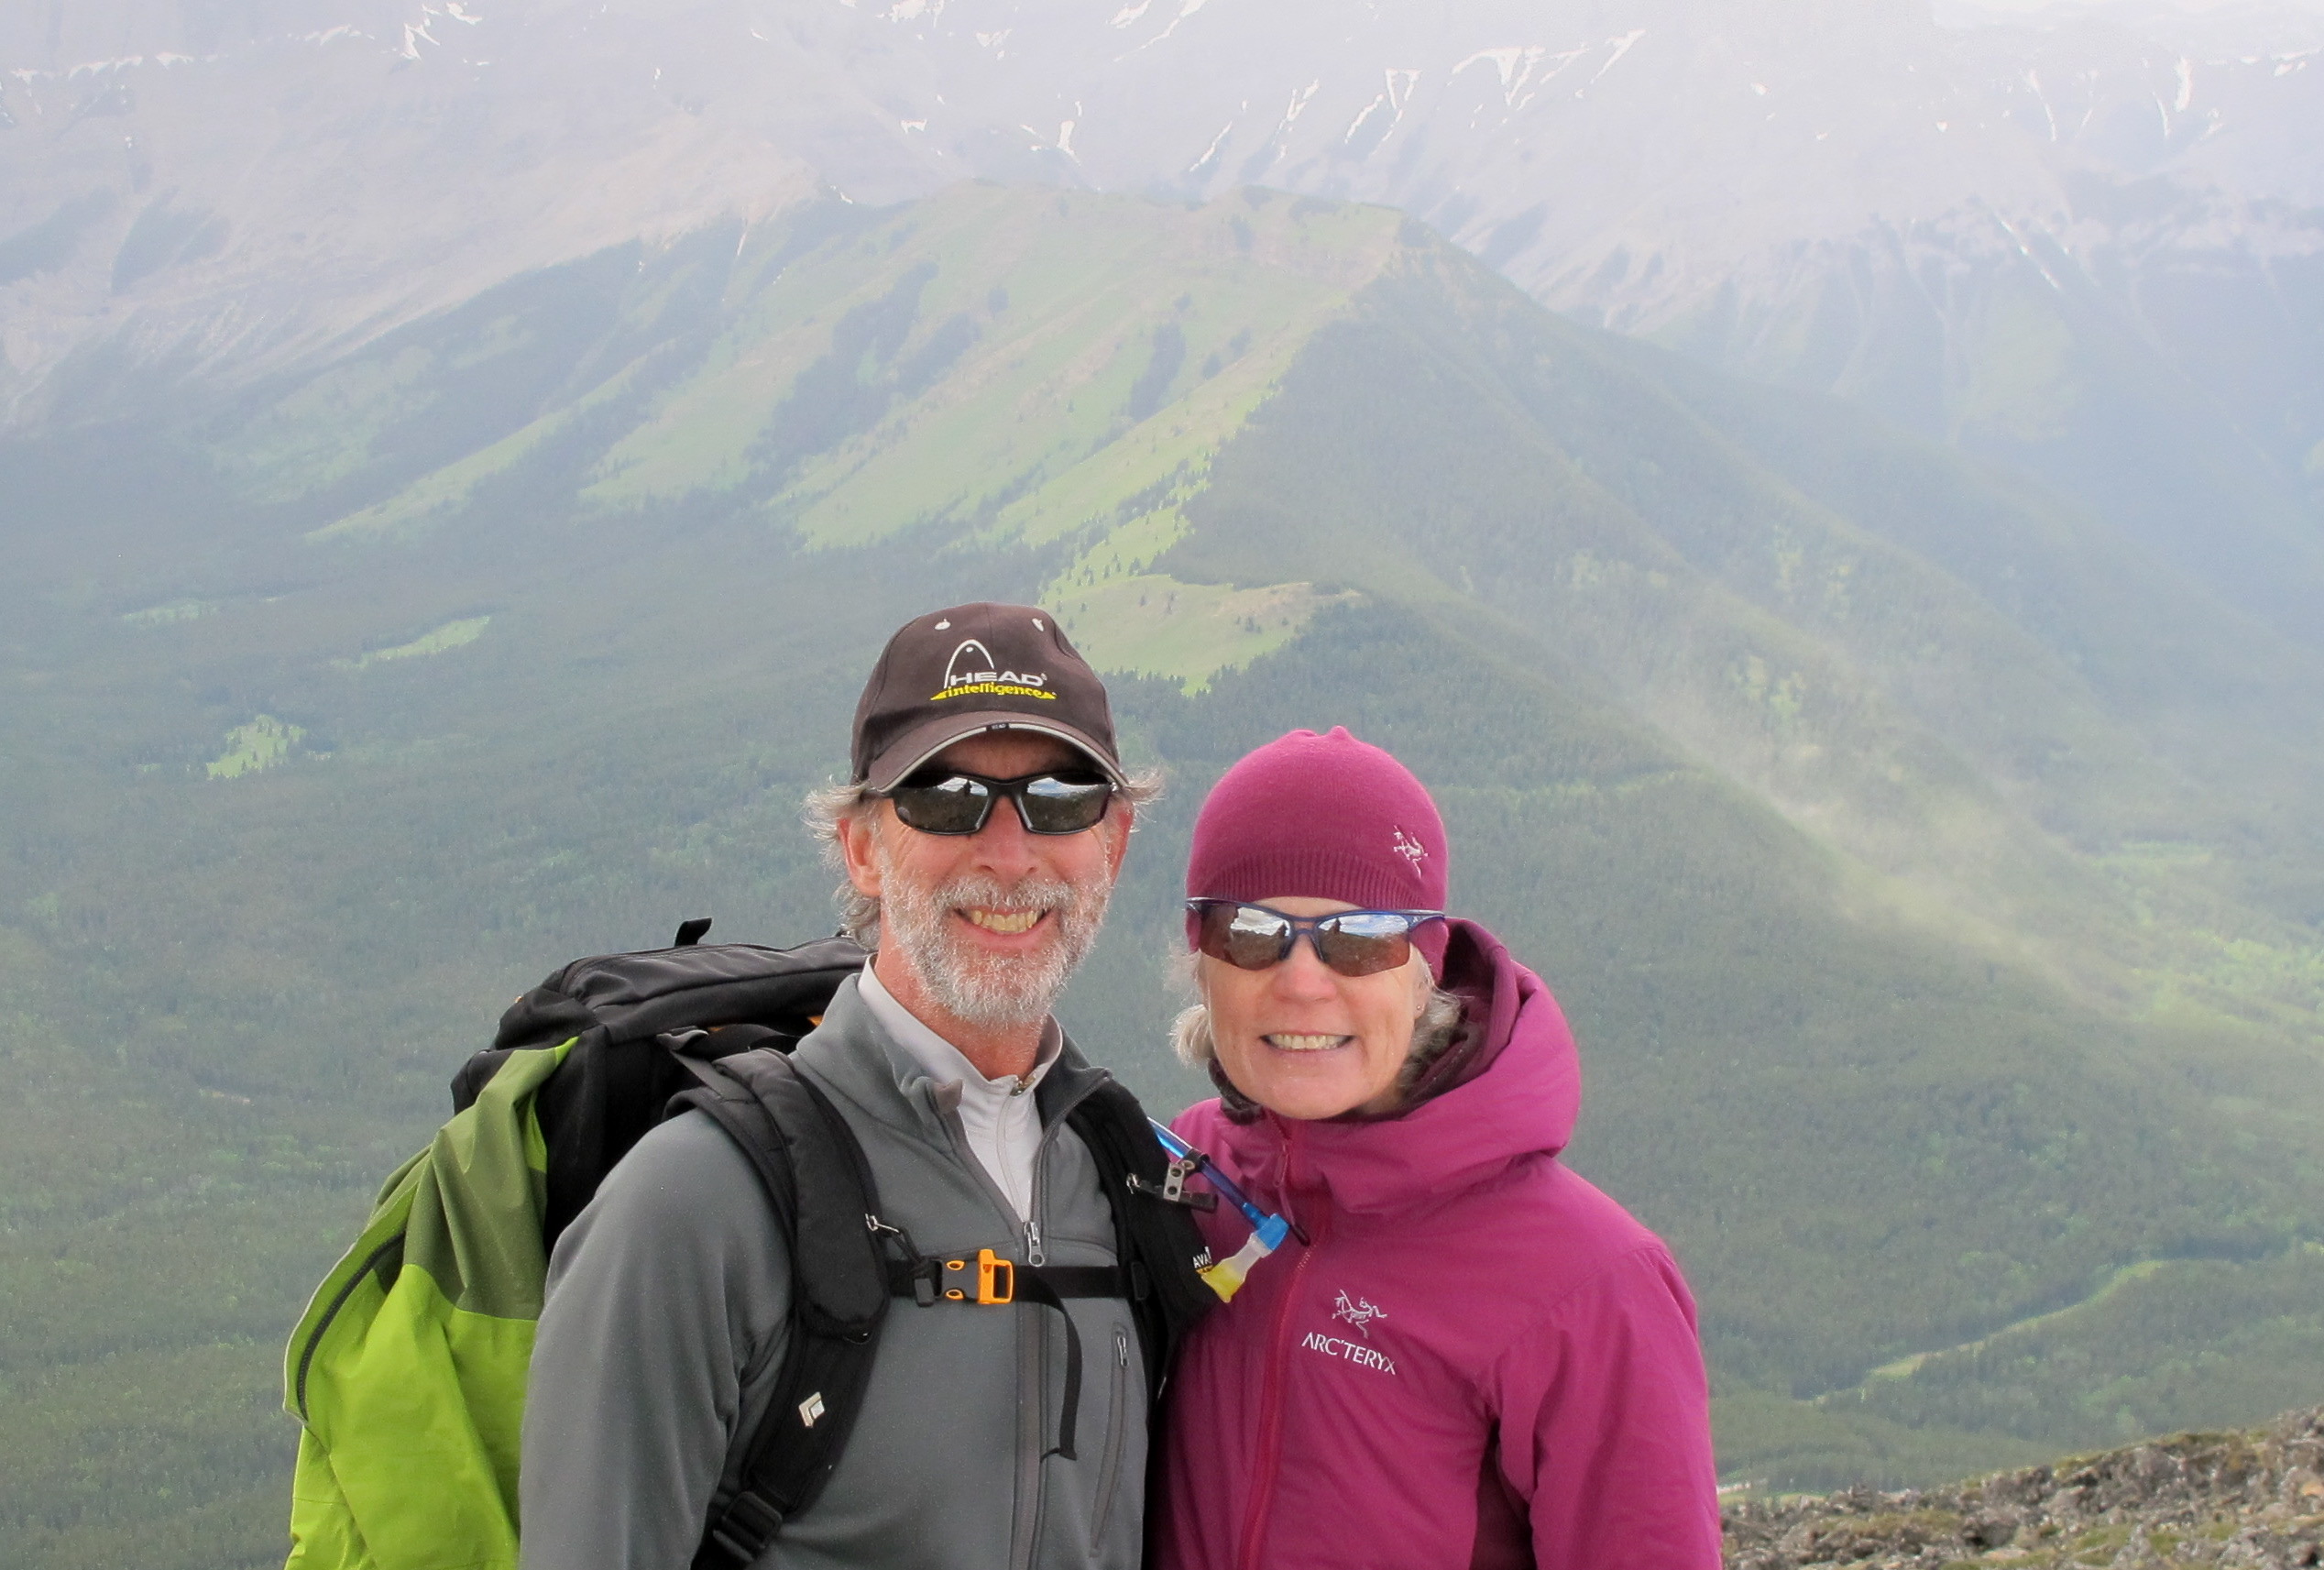 A man and a woman stand in a mountain setting. The man wears black ballcap, backpack and grey fleece hiking shirt. The woman wearing a matching pink tuque and athletic jacket. 